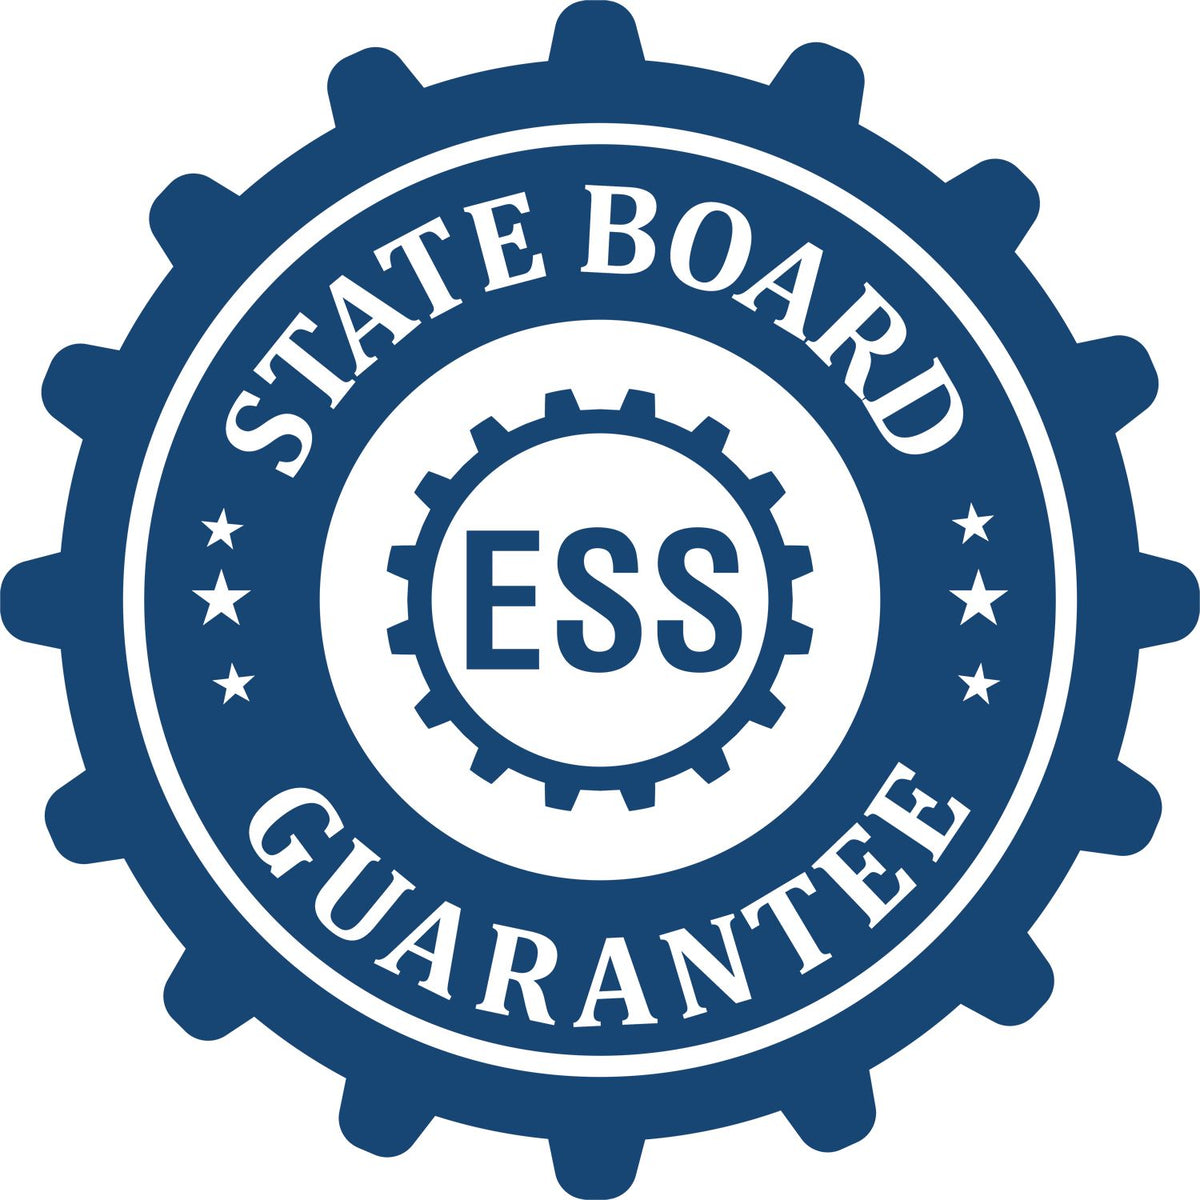 An emblem in a gear shape illustrating a state board guarantee for the State of South Carolina Extended Long Reach Geologist Seal